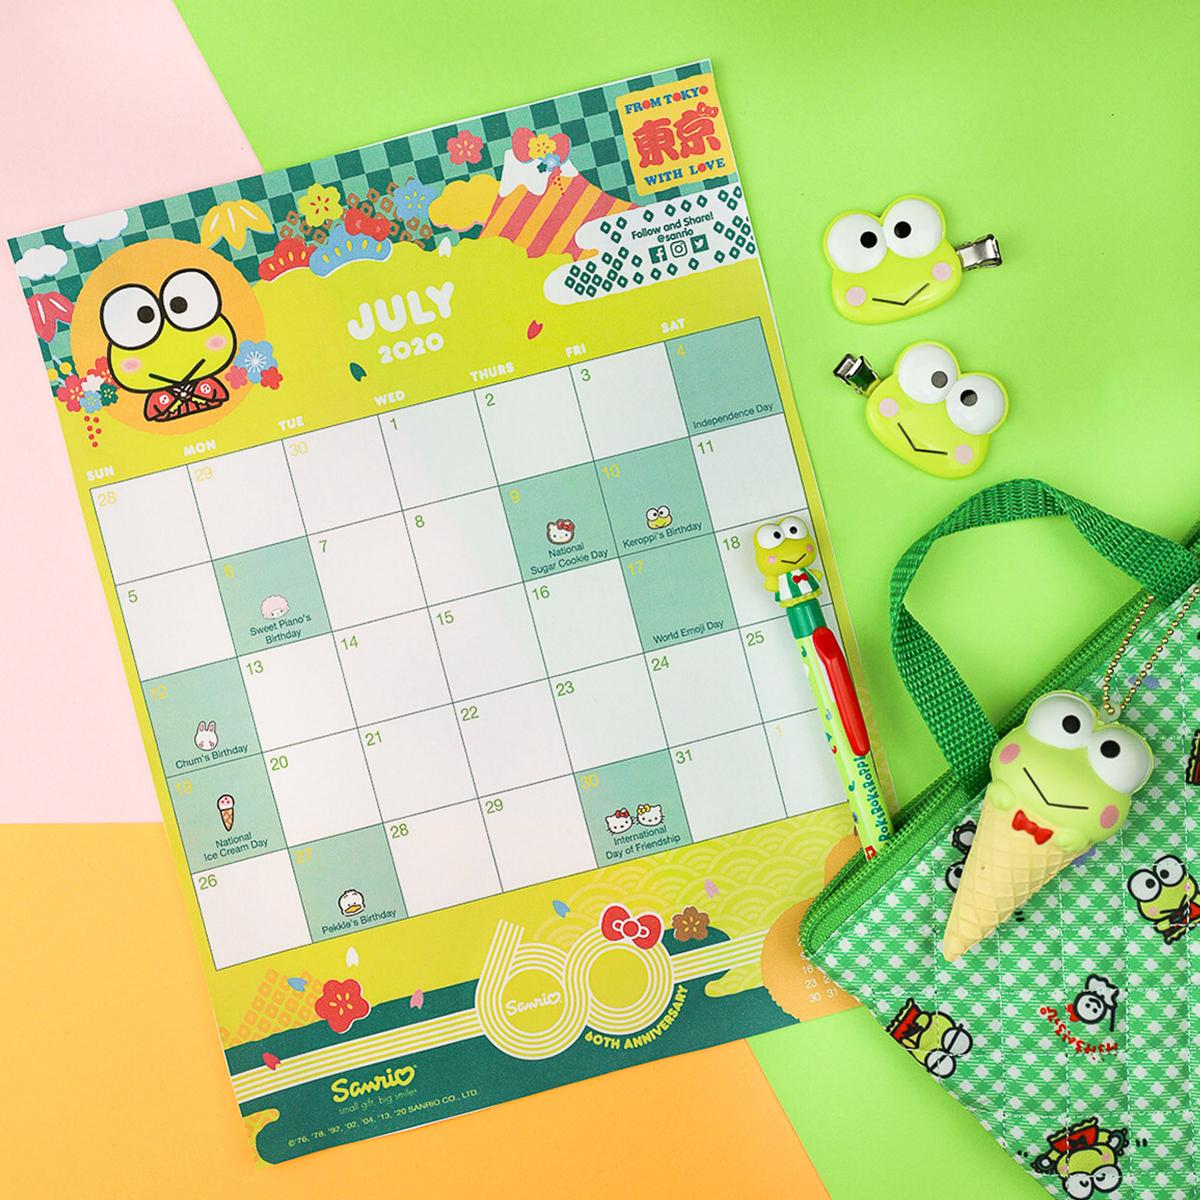 Keroppi is the Sanrio Friend of the Month!